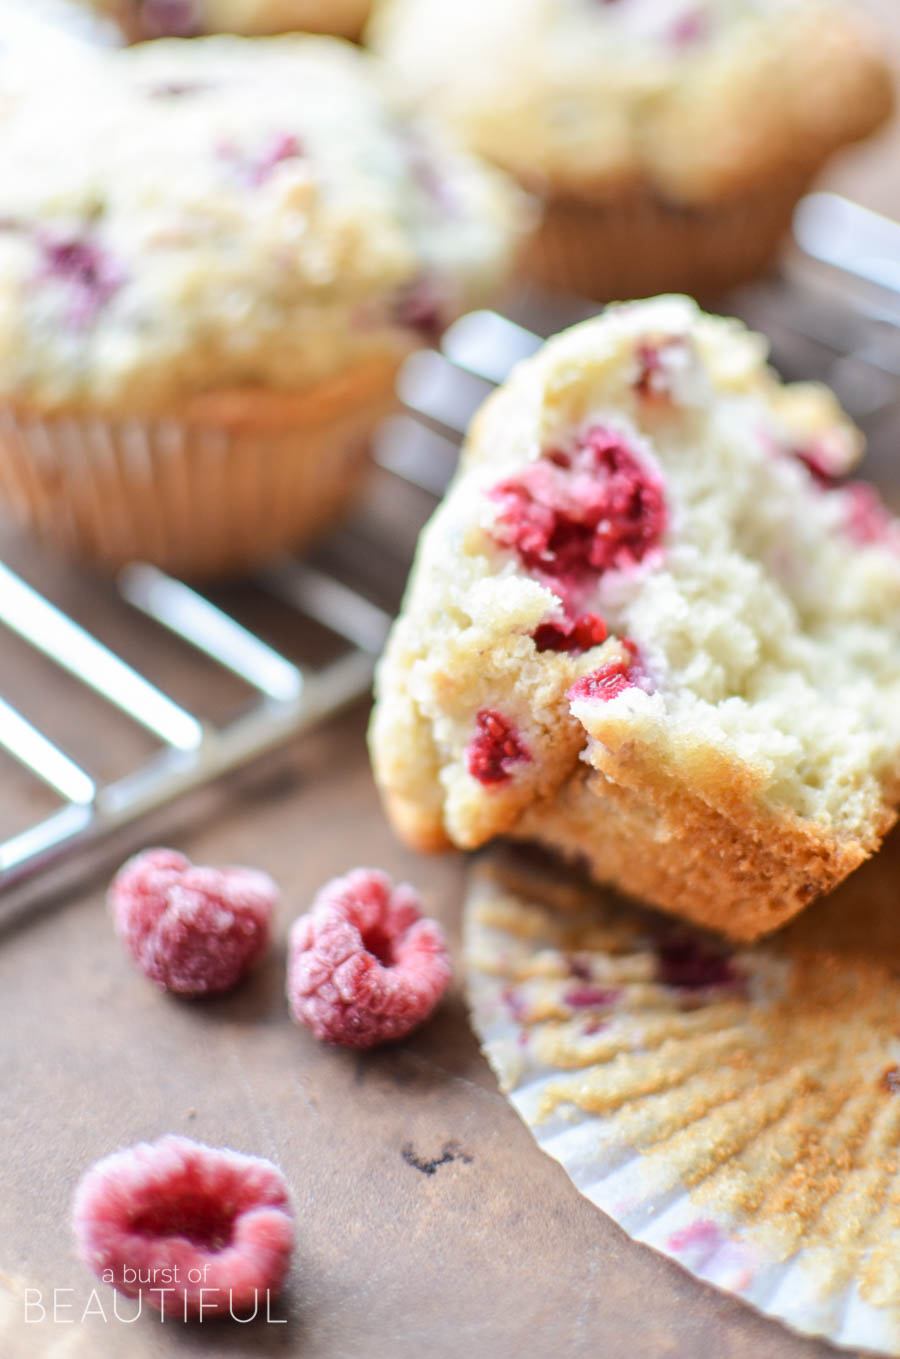 These homemade raspberry muffins are light, fluffy and bursting with juicy raspberries. They are a family favorite any time of the year | A Burst of Beautiful